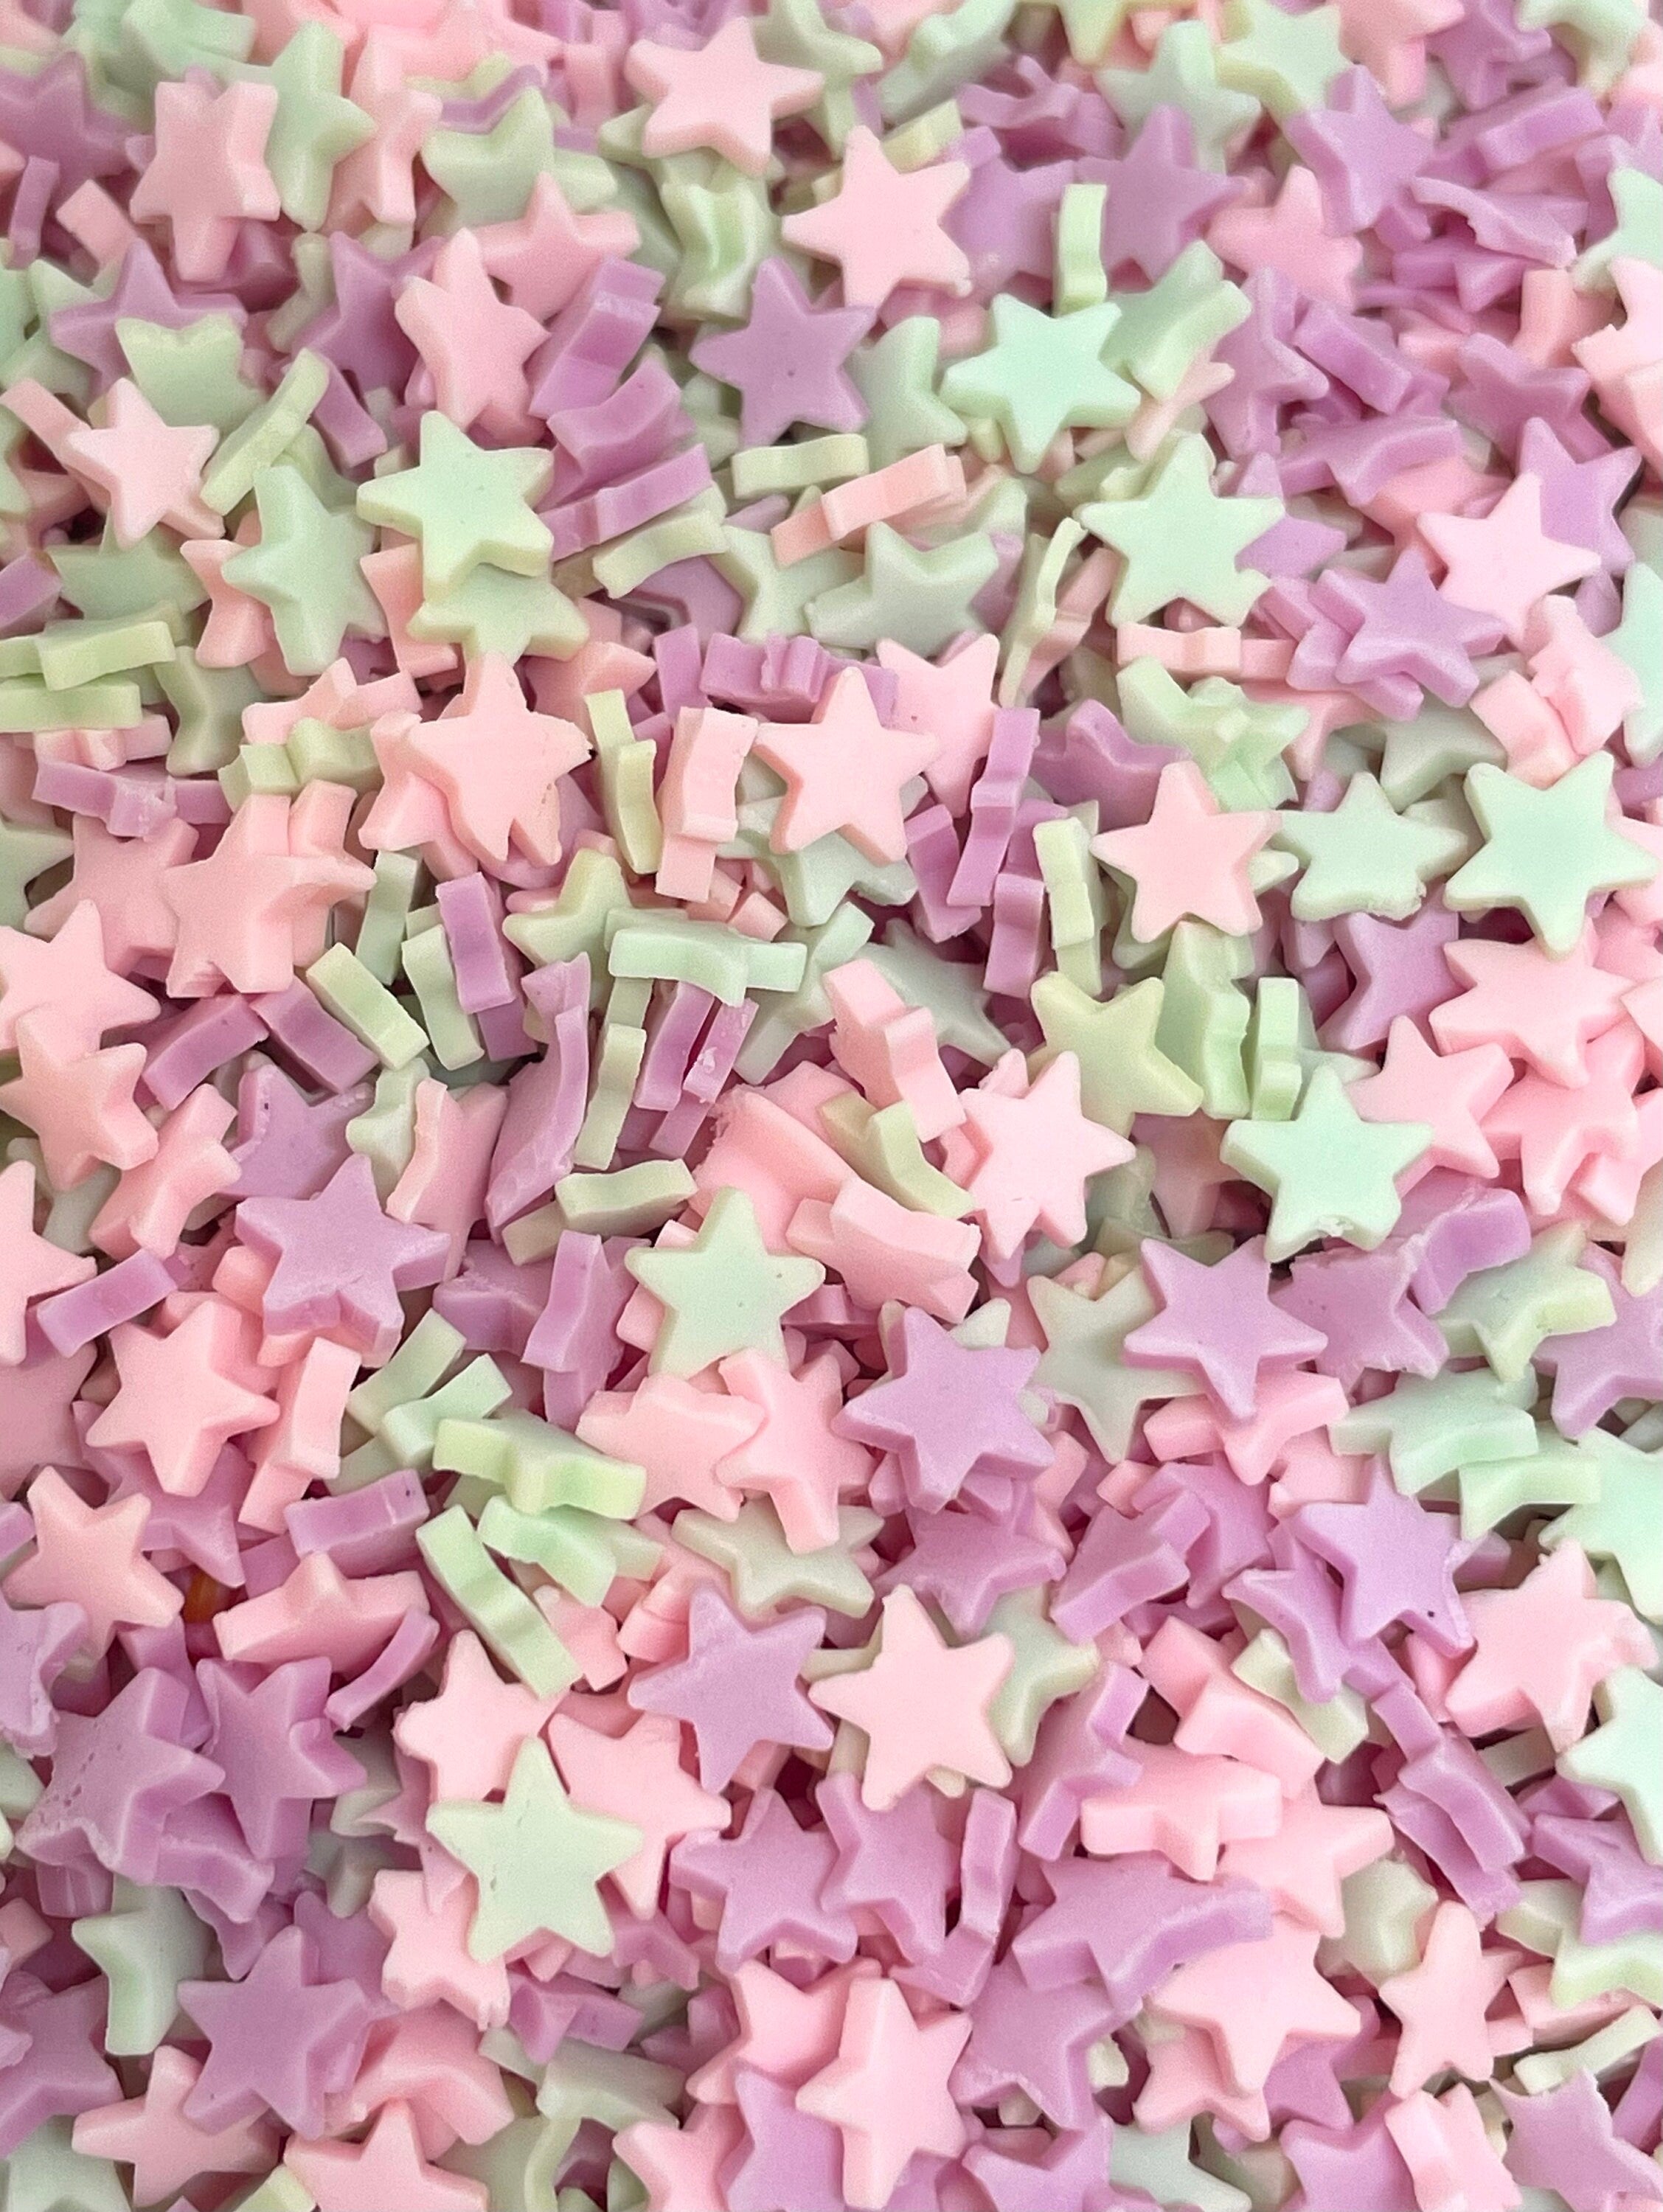 Fake Pastel Star Sprinkles, Polymer Clay Faux Toppings, Slime Add